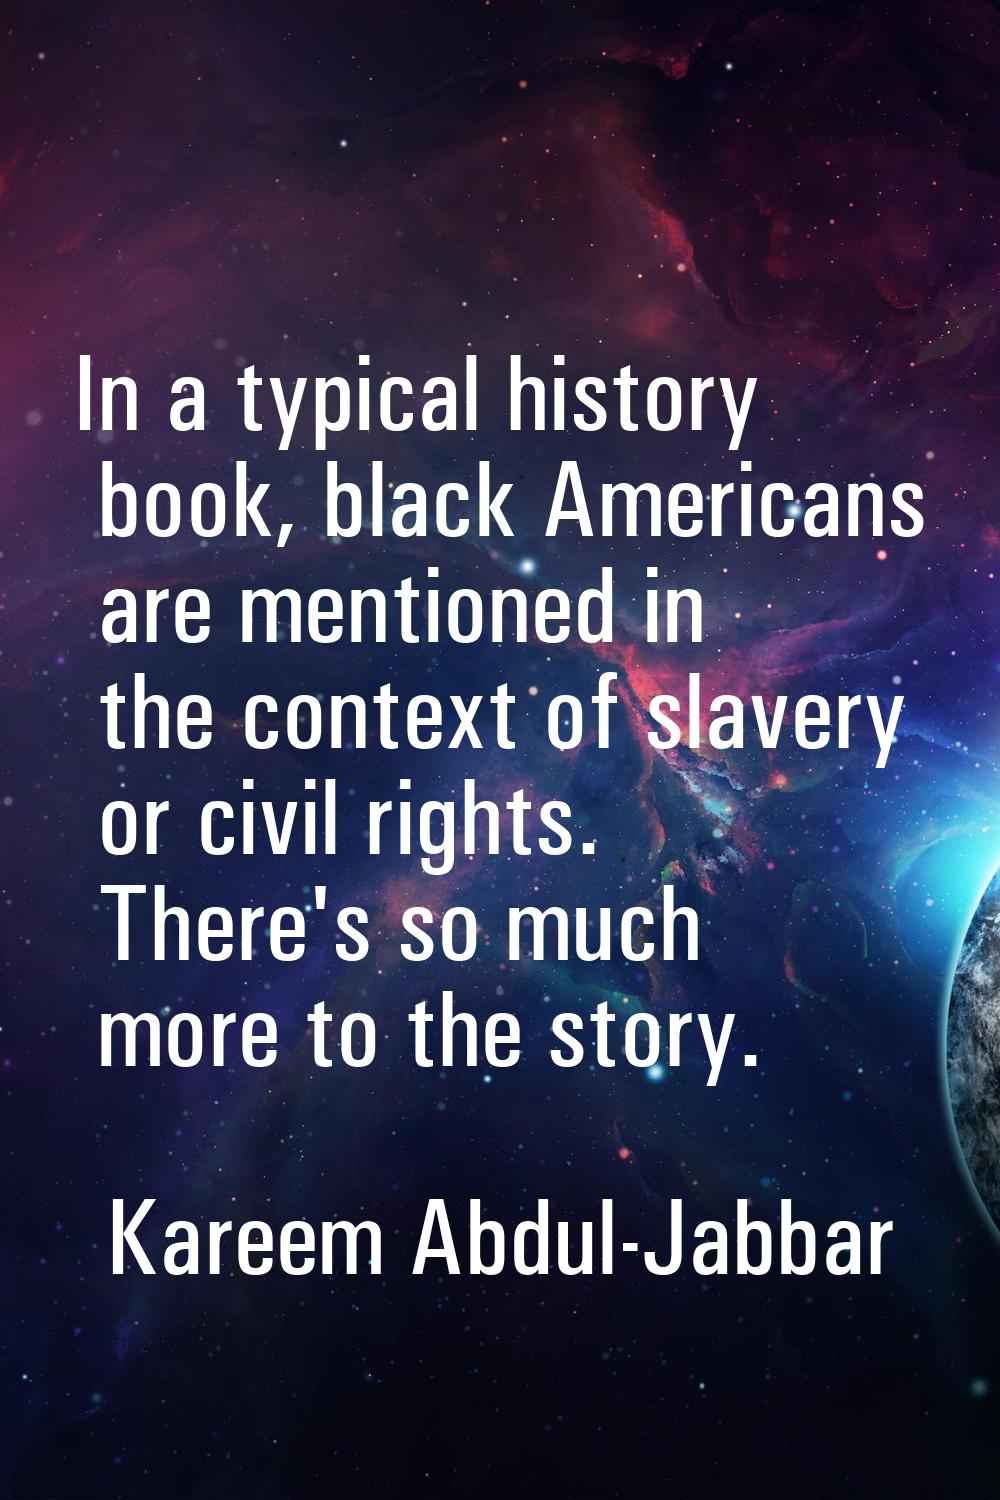 In a typical history book, black Americans are mentioned in the context of slavery or civil rights.